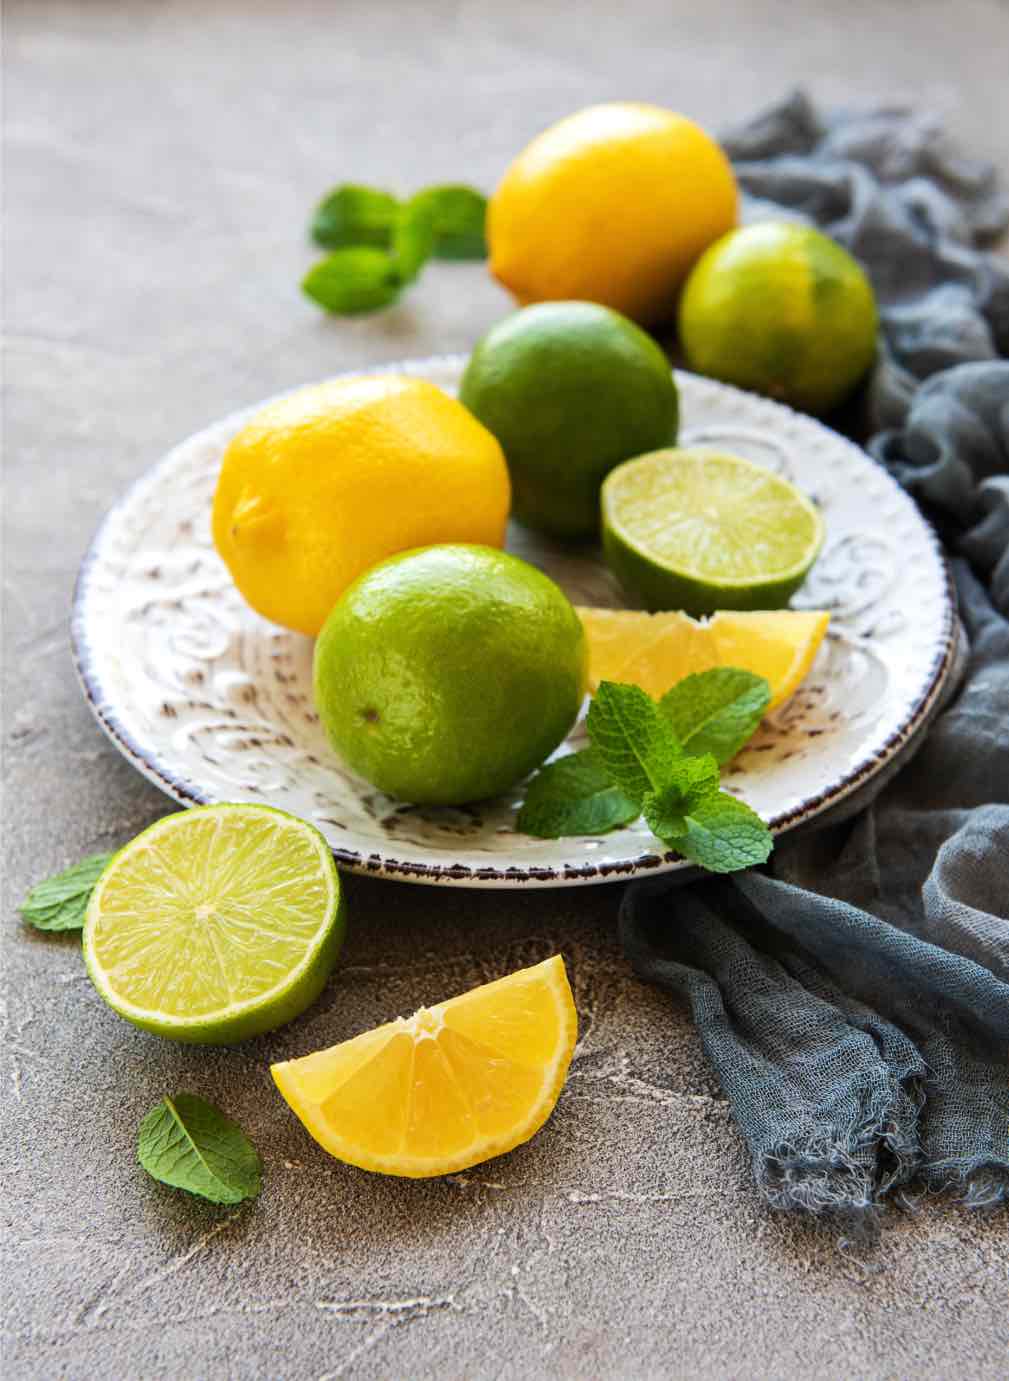 Lemons and limes are great for humans, but not for dogs - learn more with Dog Training Elite!